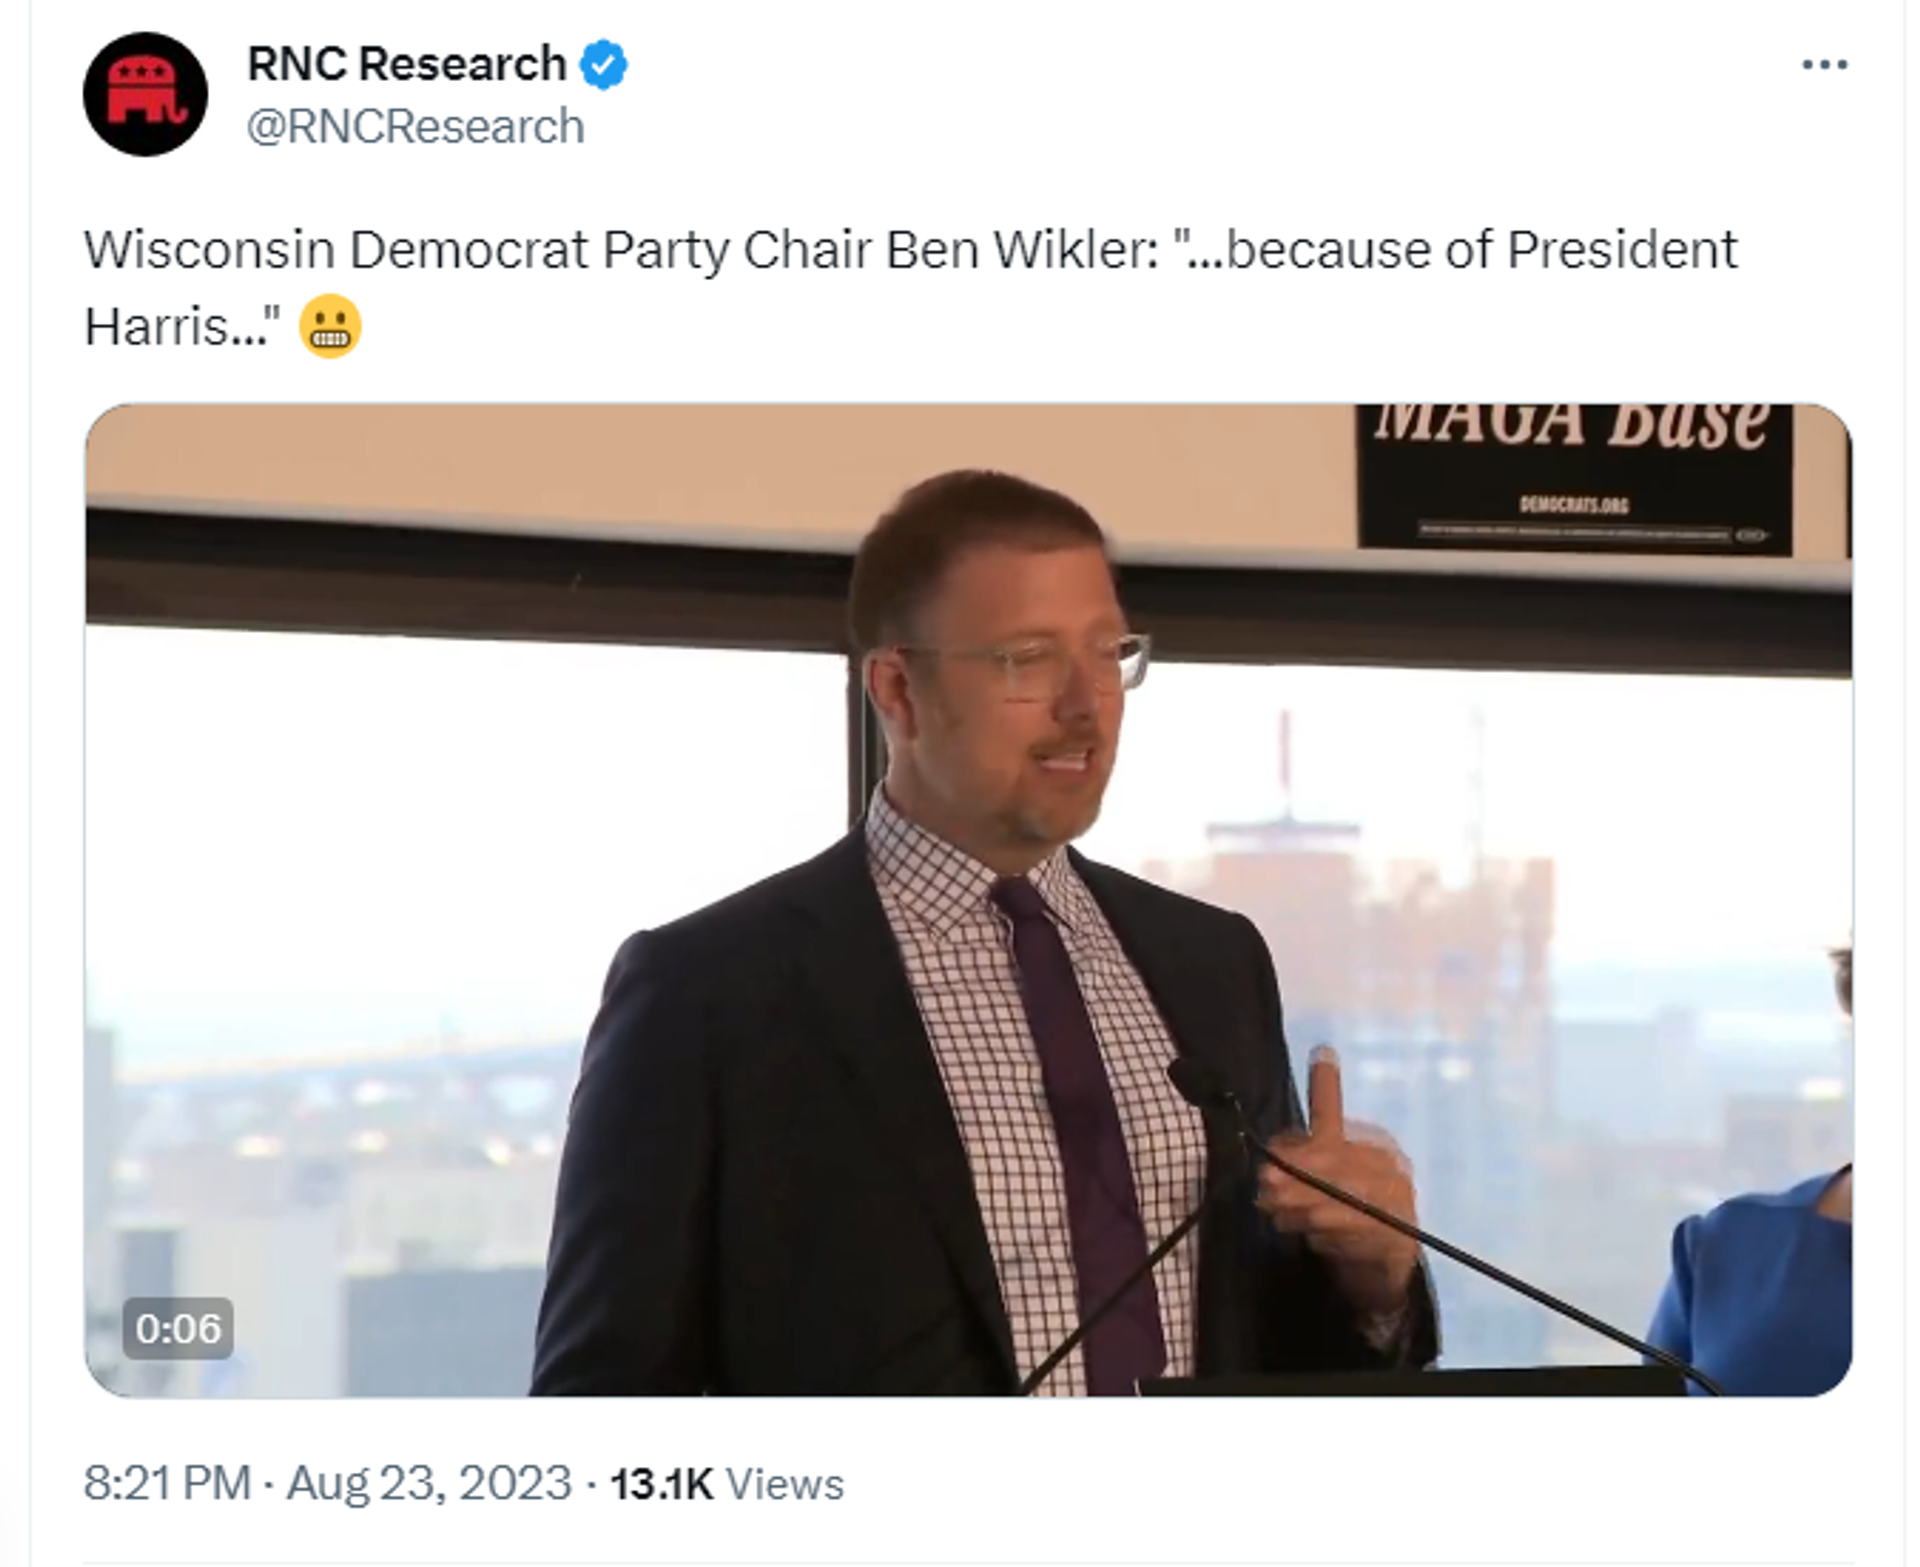 Screenshot of X post on account belonging to the Republican National Committee (RNC) featuring footage of remarks by chairman of the Democratic Party of Wisconsin, Ben Wikler. - Sputnik International, 1920, 24.08.2023